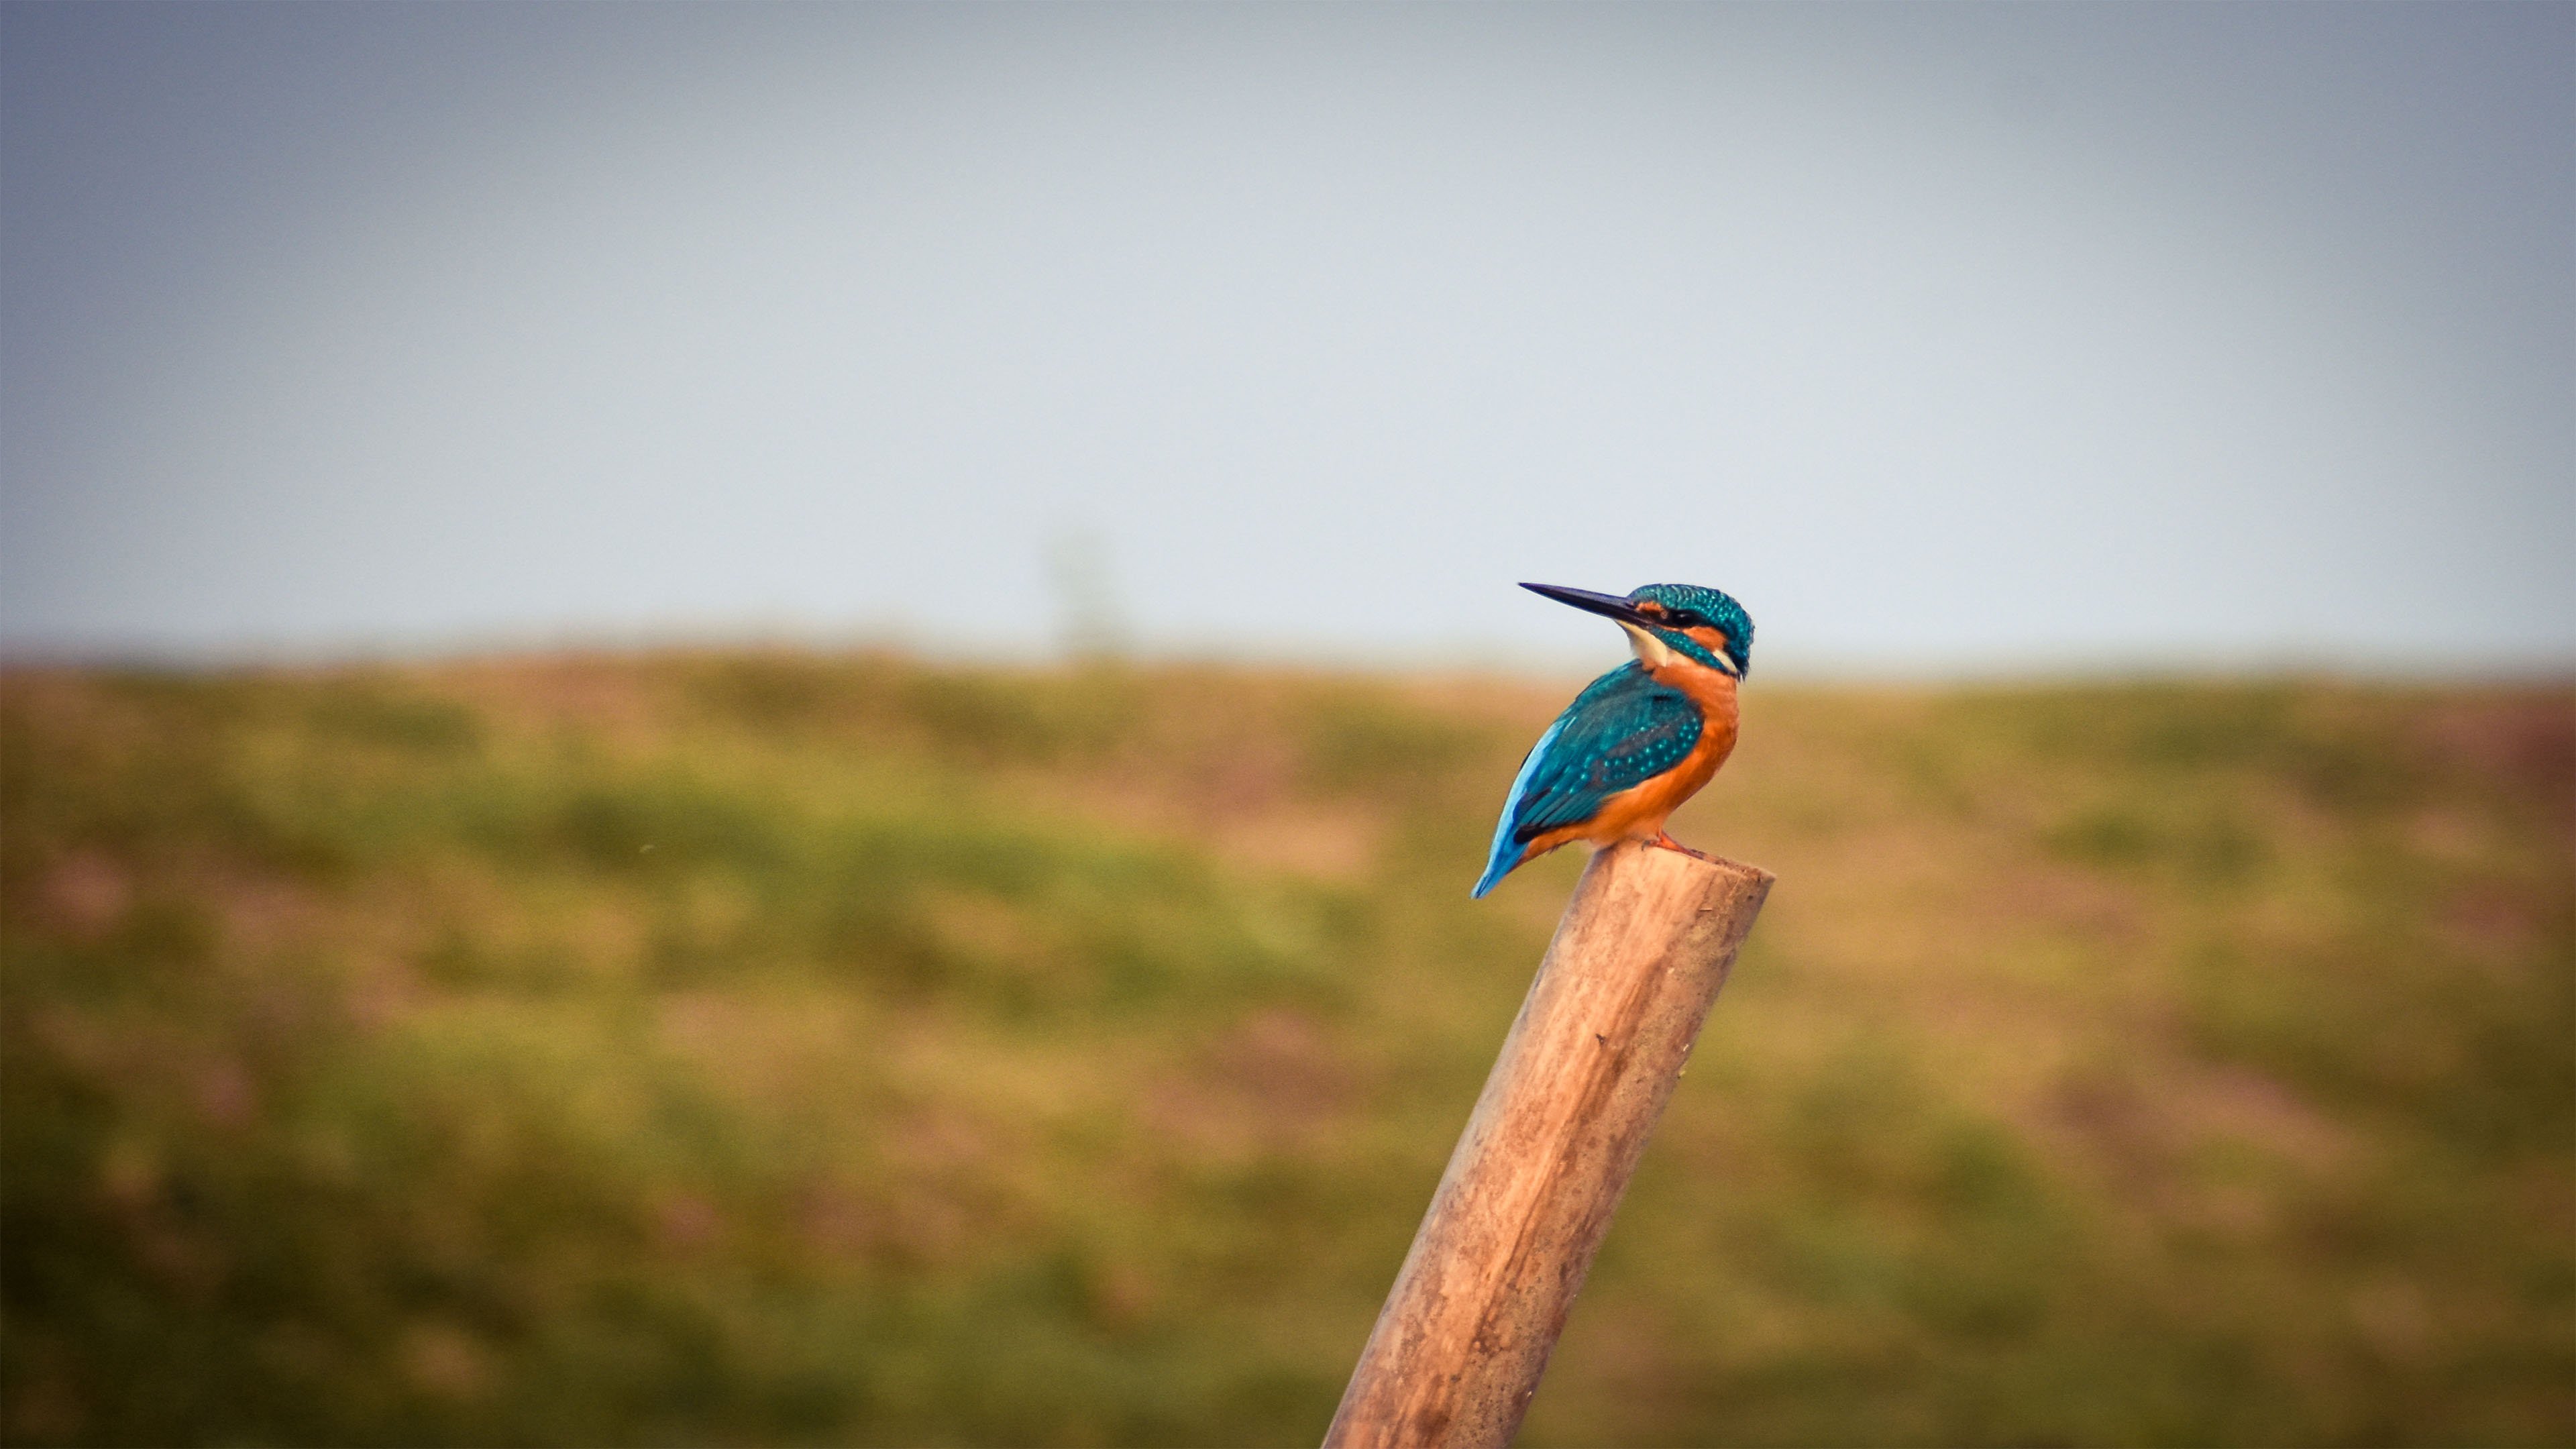 Kingfisher 4K wallpapers for your desktop or mobile screen free and easy to  download